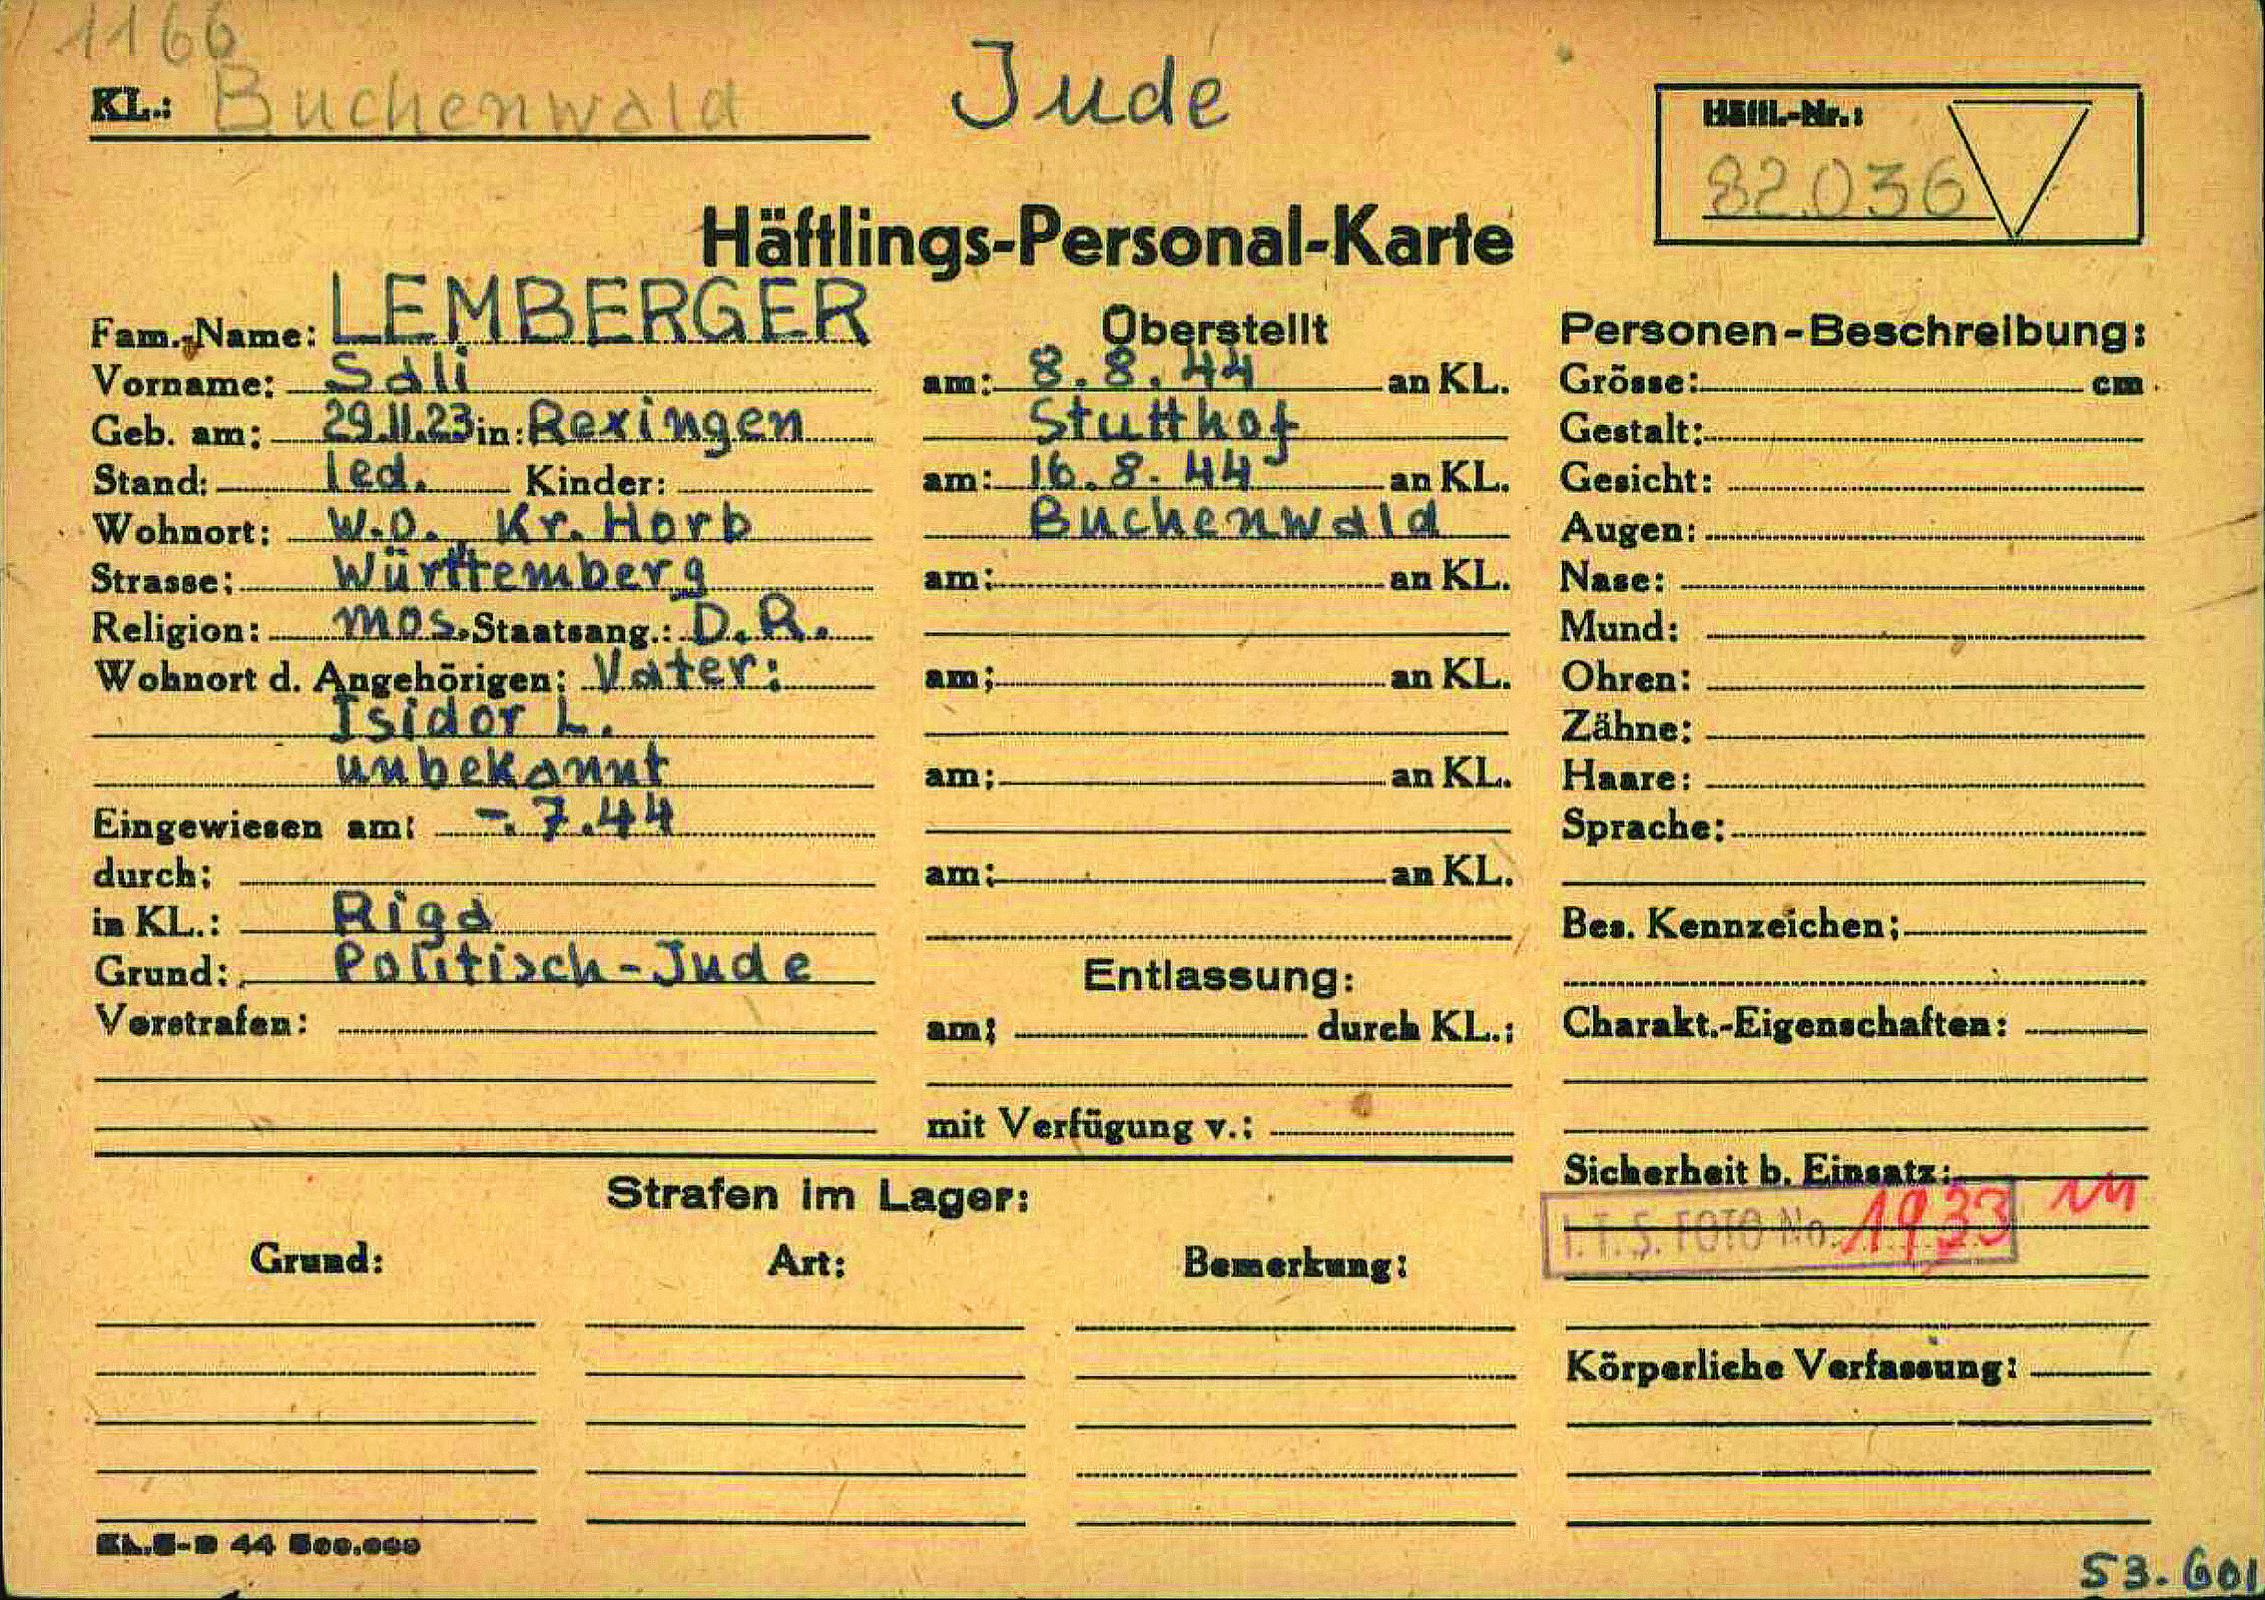 Buchenwald concentration camp registration card for Sally Lemberger.